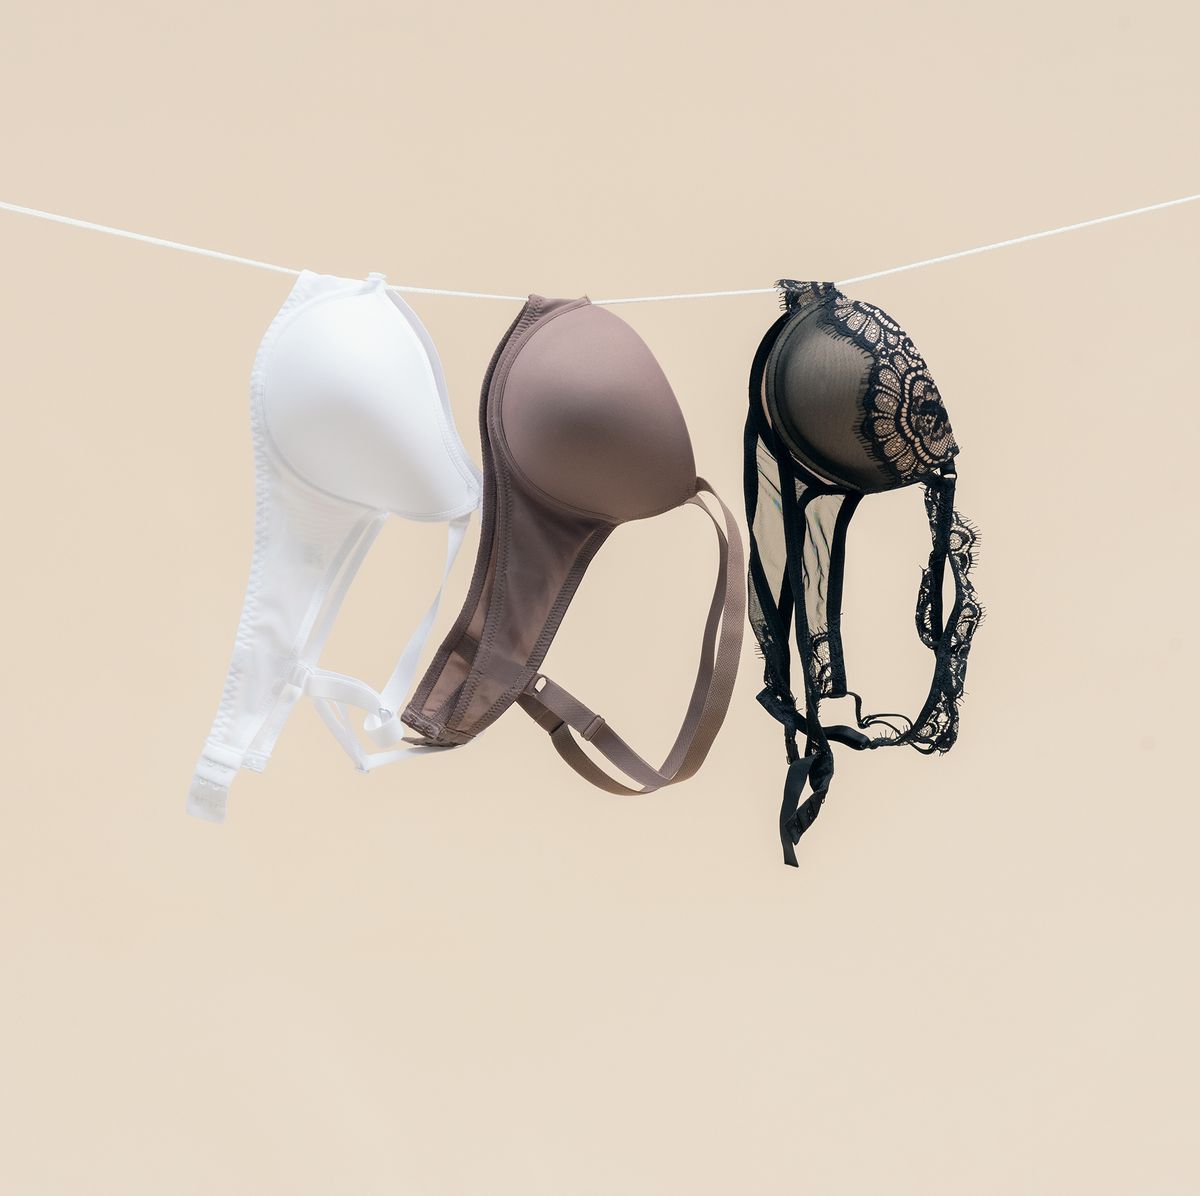 M&S Bath - We want hanging bras all over Bath ! We're